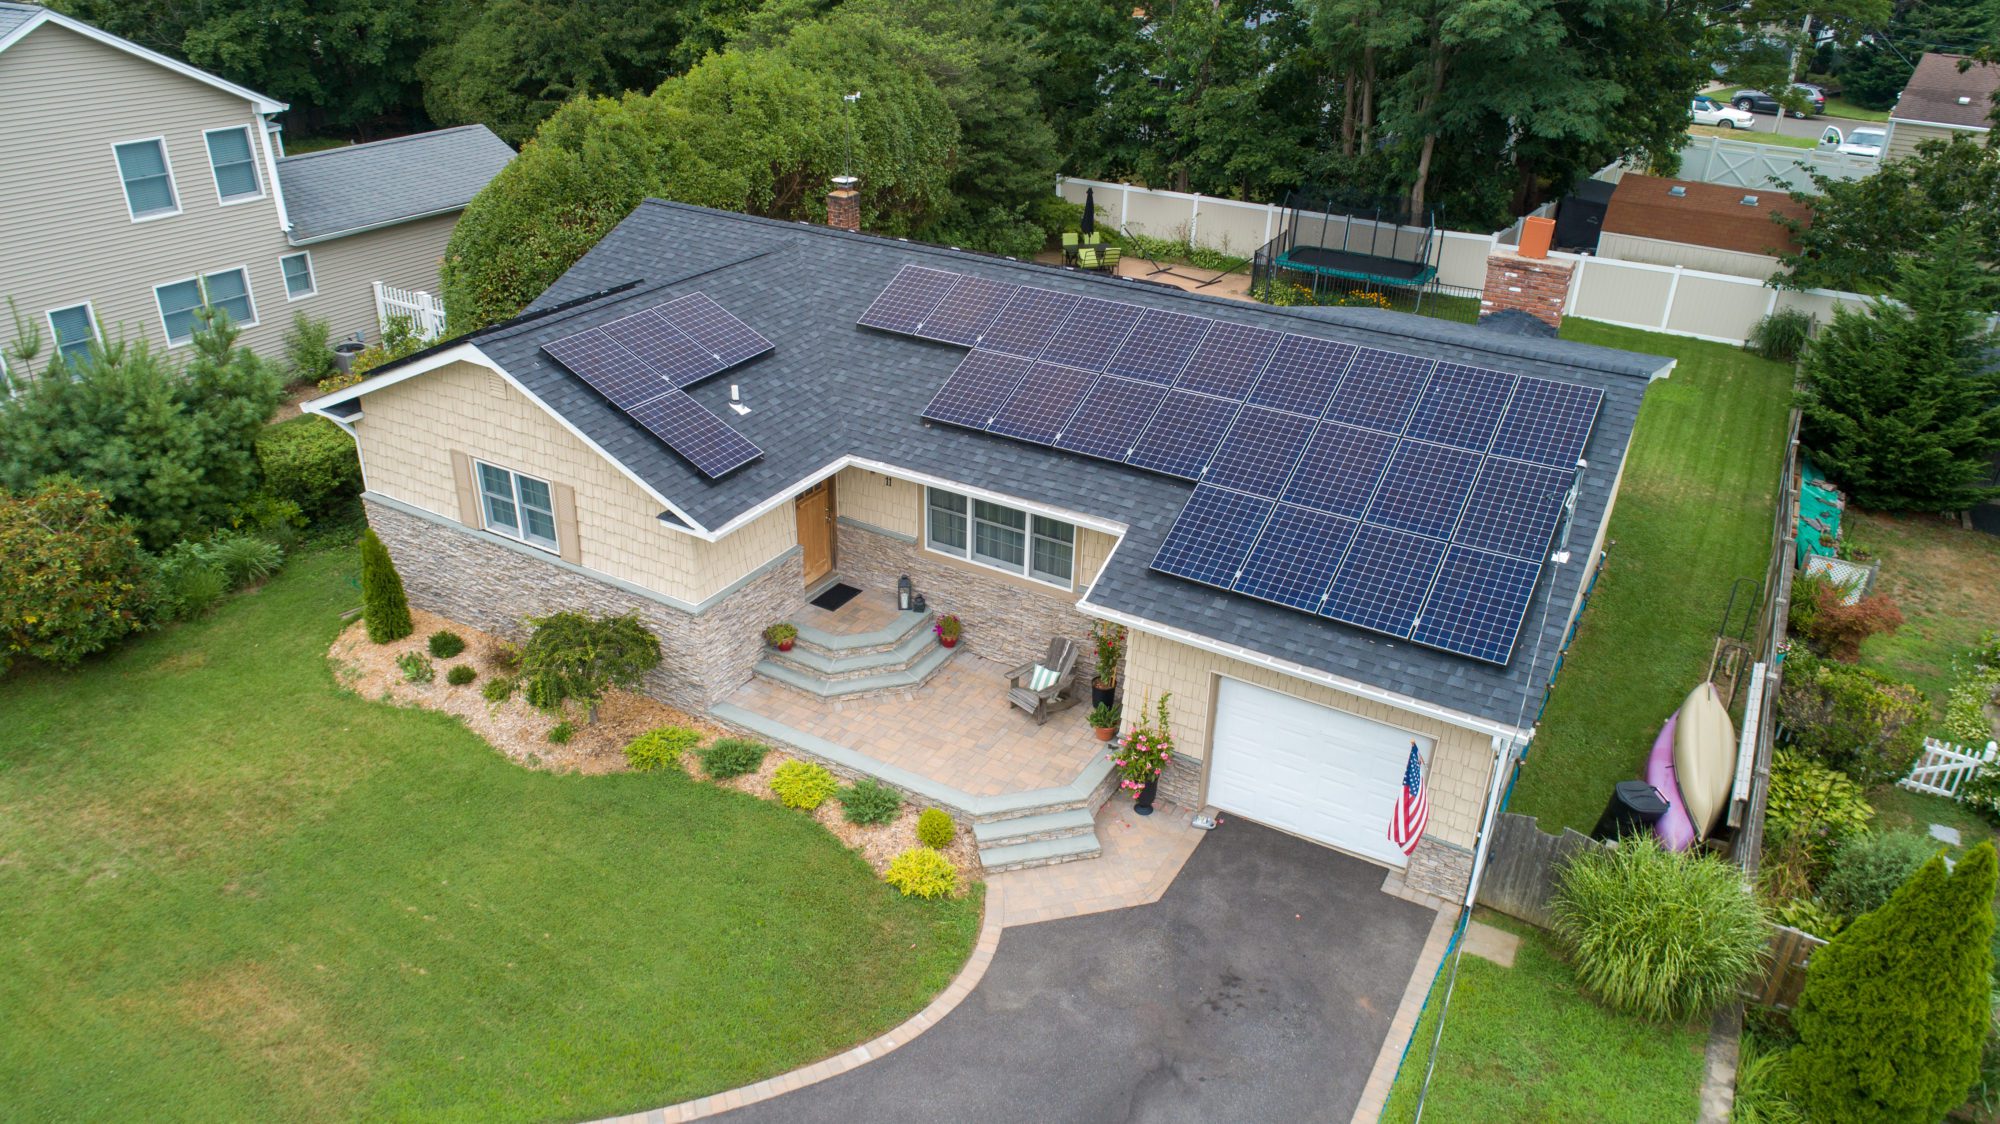 A home with solar panels on the roof. Solar can help you avoid high heating bills this winter.